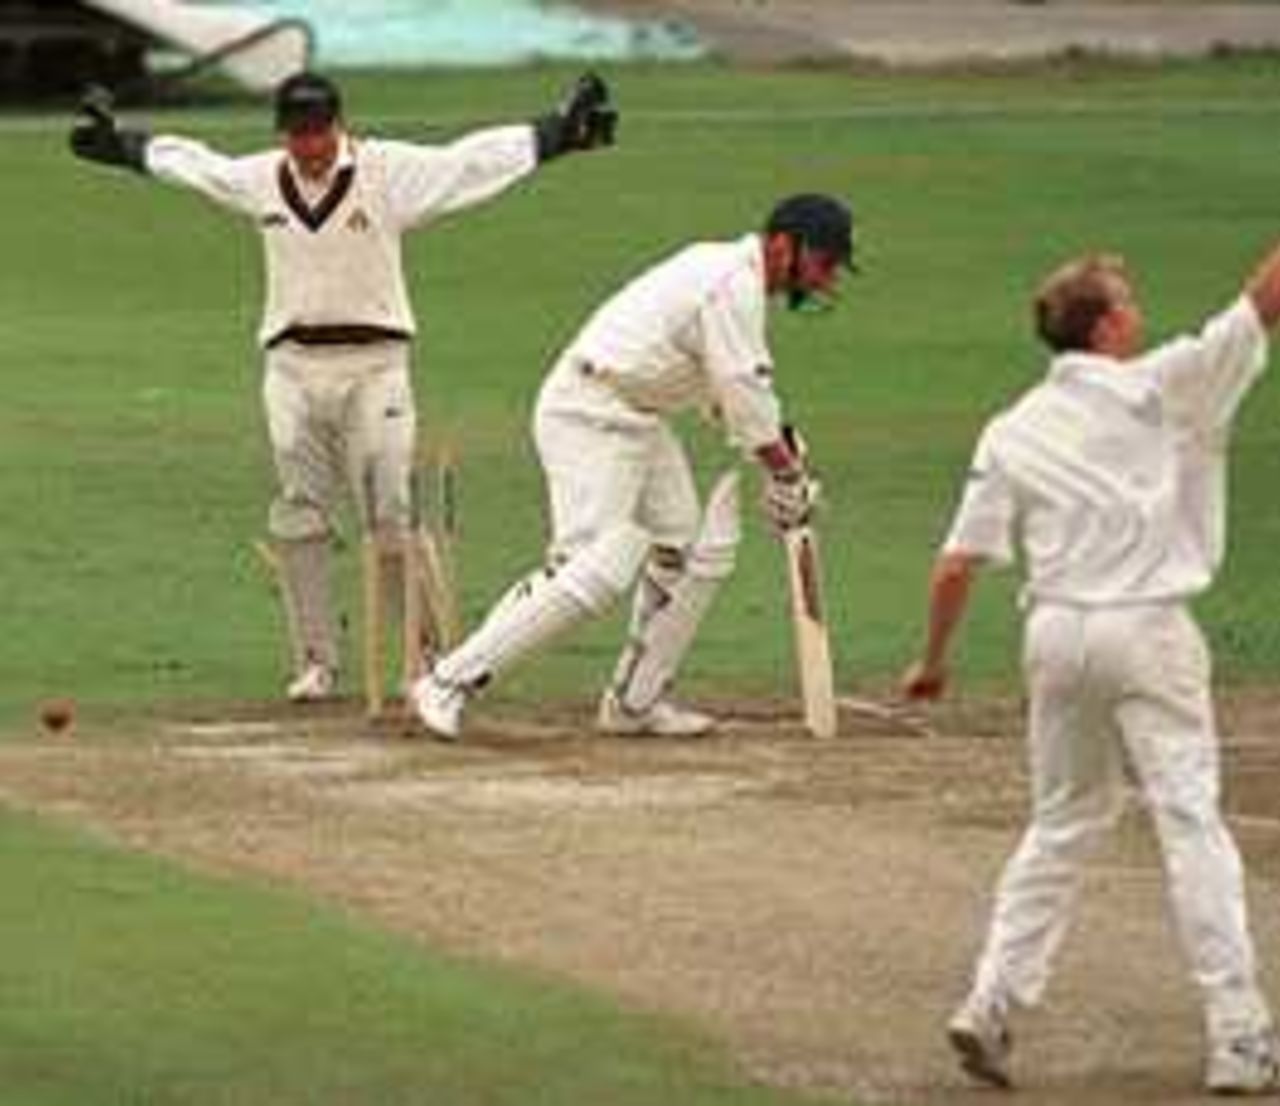 Fleming bowled by Schofield, County Championship, Lancashire v Kent, 8-11 September 1999